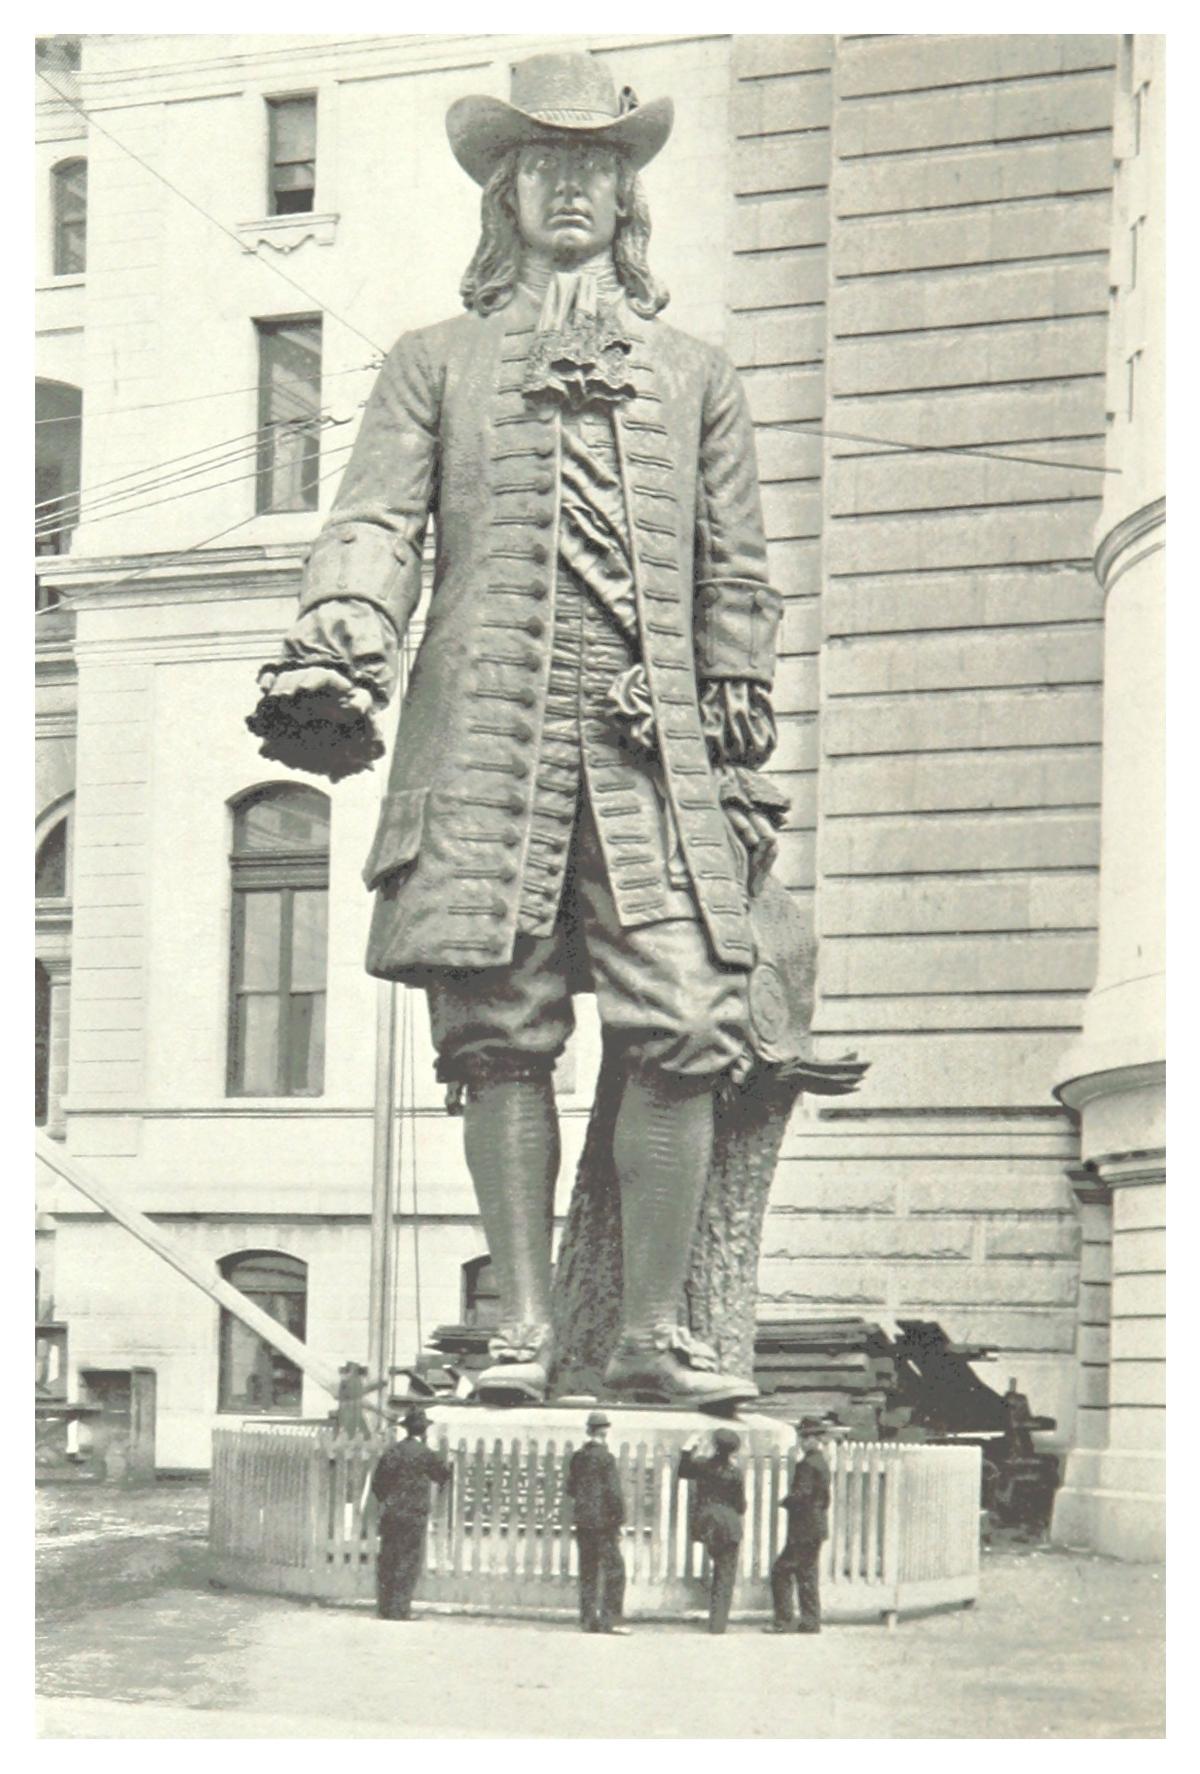 The enormous yet refined statue of William Penn, measuring 37 feet high, stood in the courtyard before taking its position at the top of the tower. The statue’s size provides perspective on just how grand the building is. The top of Penn's hat stands at 547 feet 11.25 inches above ground level. (Public Domain)